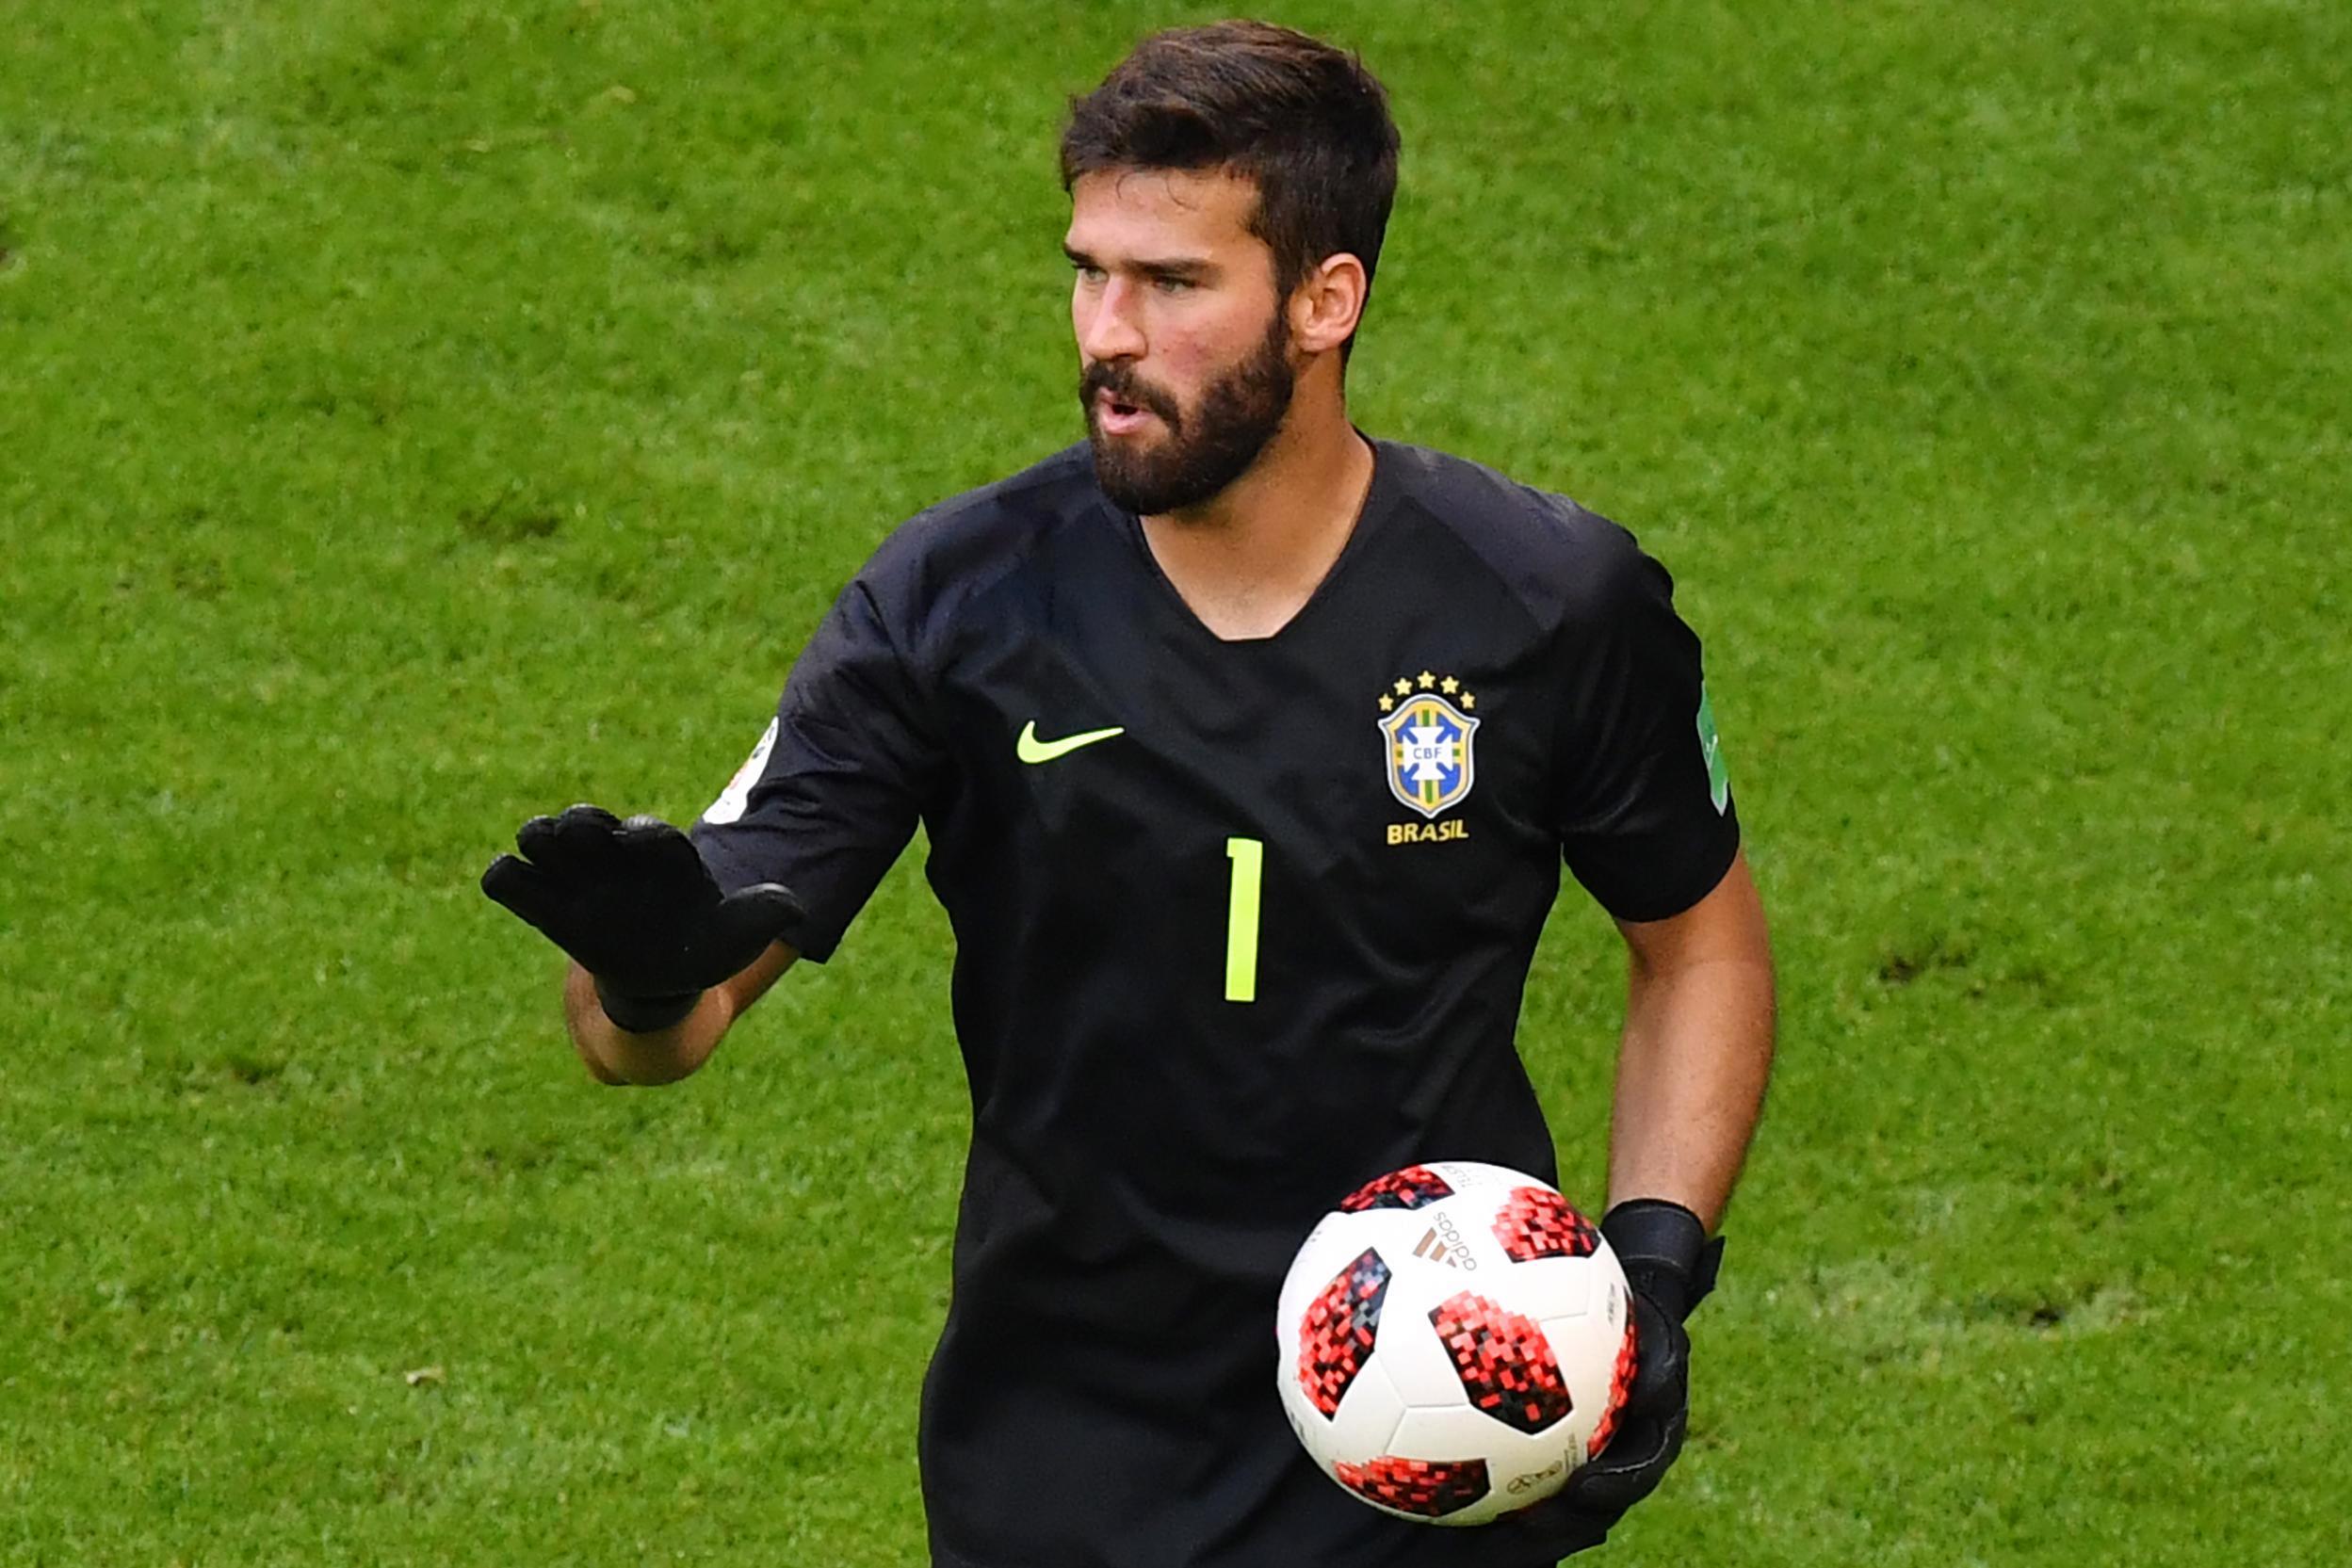 Liverpool News: Reds make £58m offer for Roma goalkeeper Alisson